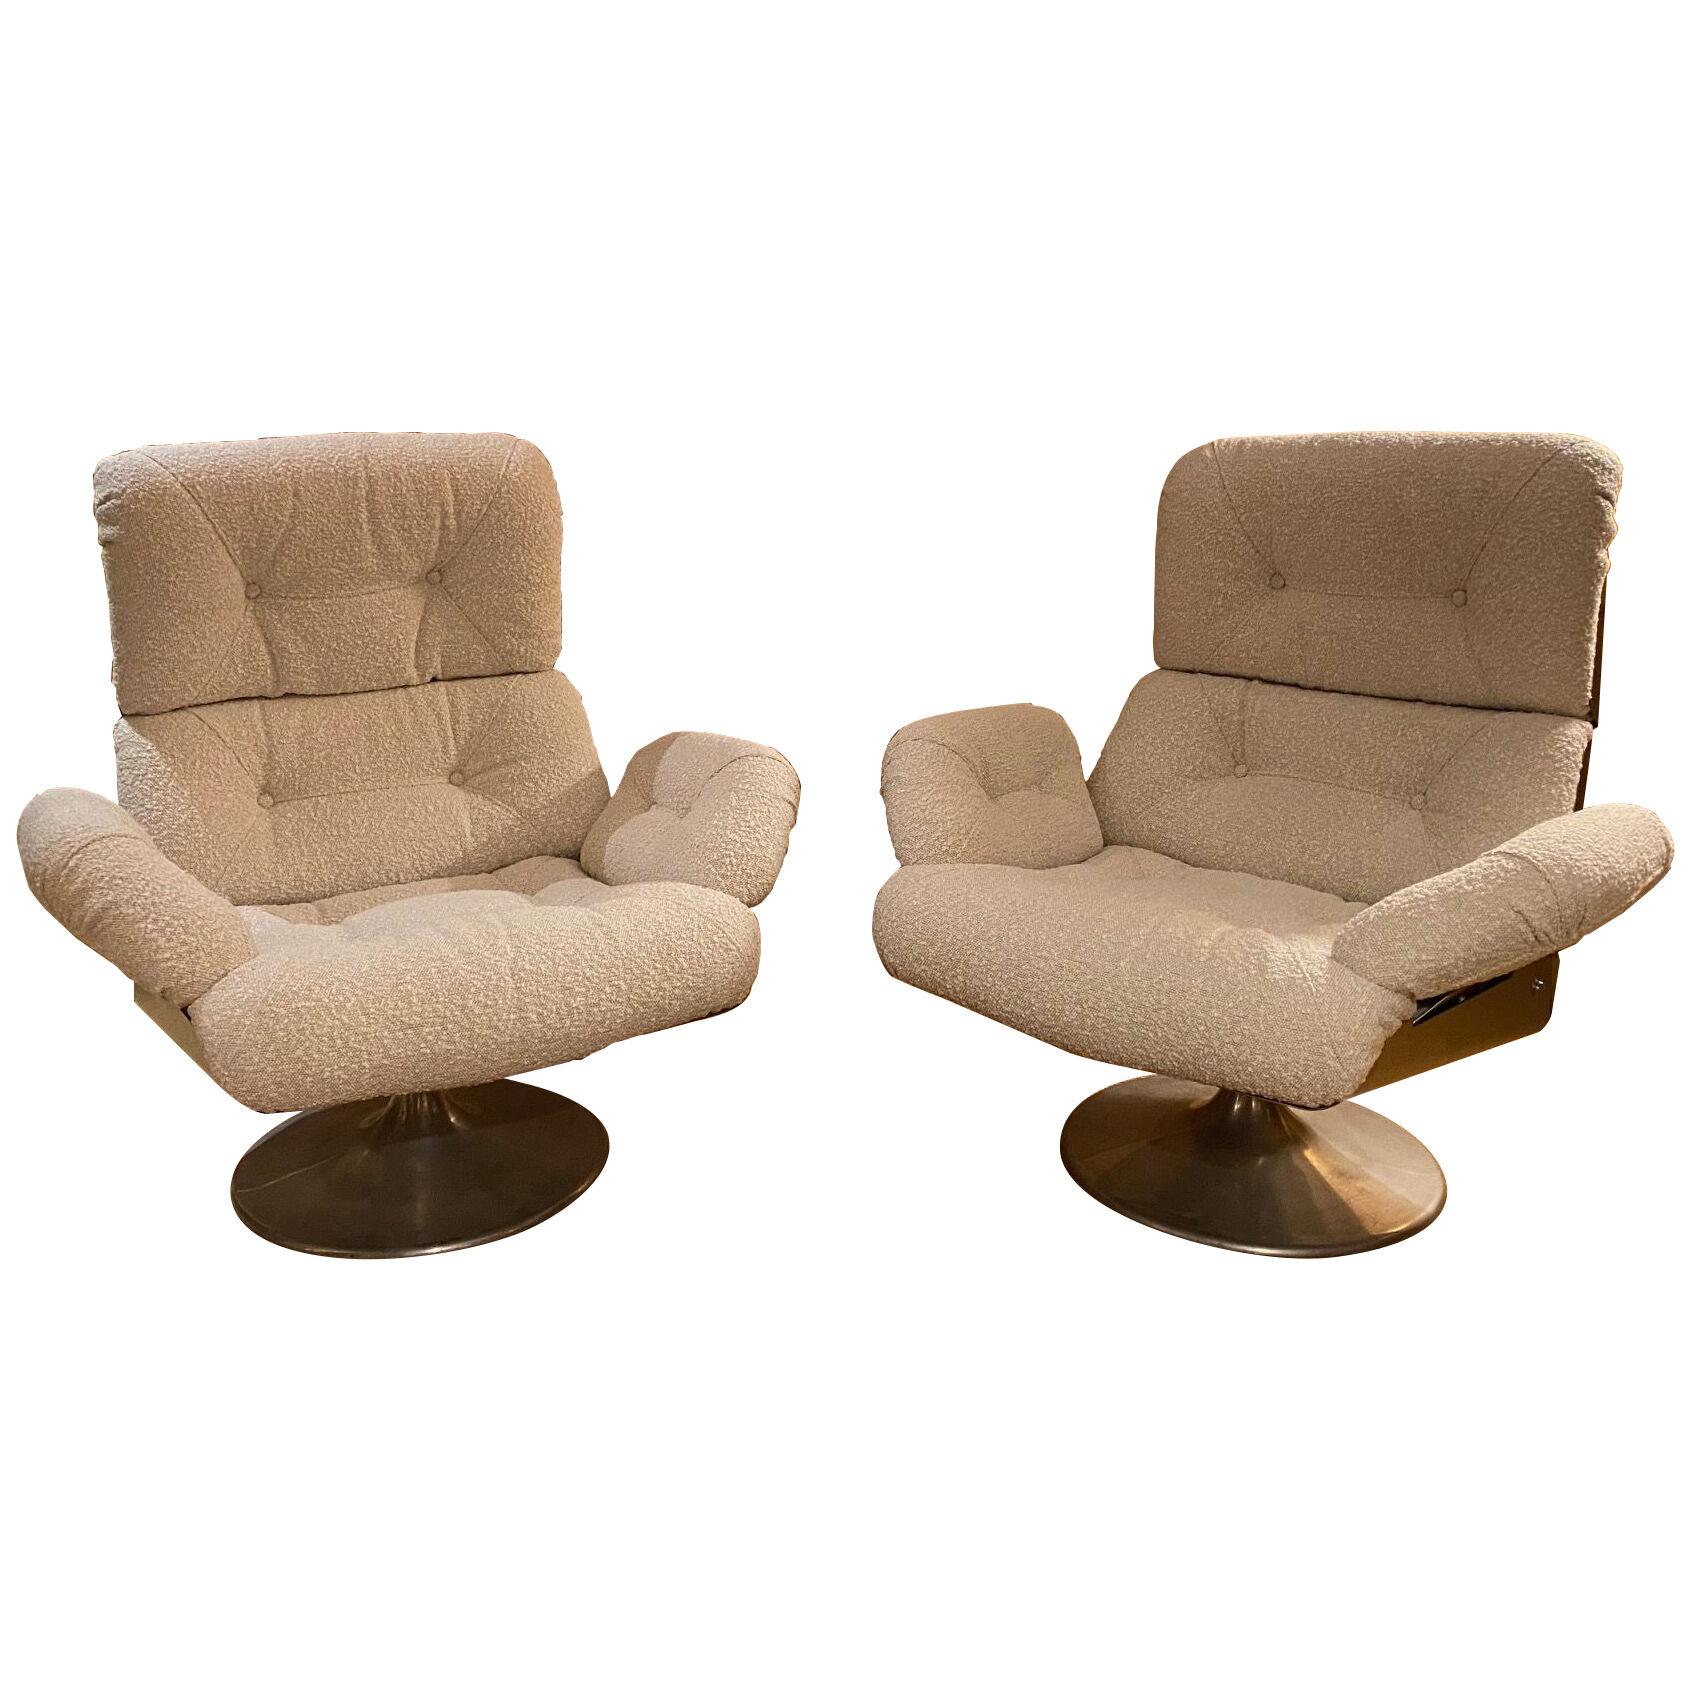 Pair of High Slipper Chairs by Xavier Féal, France, 1970s